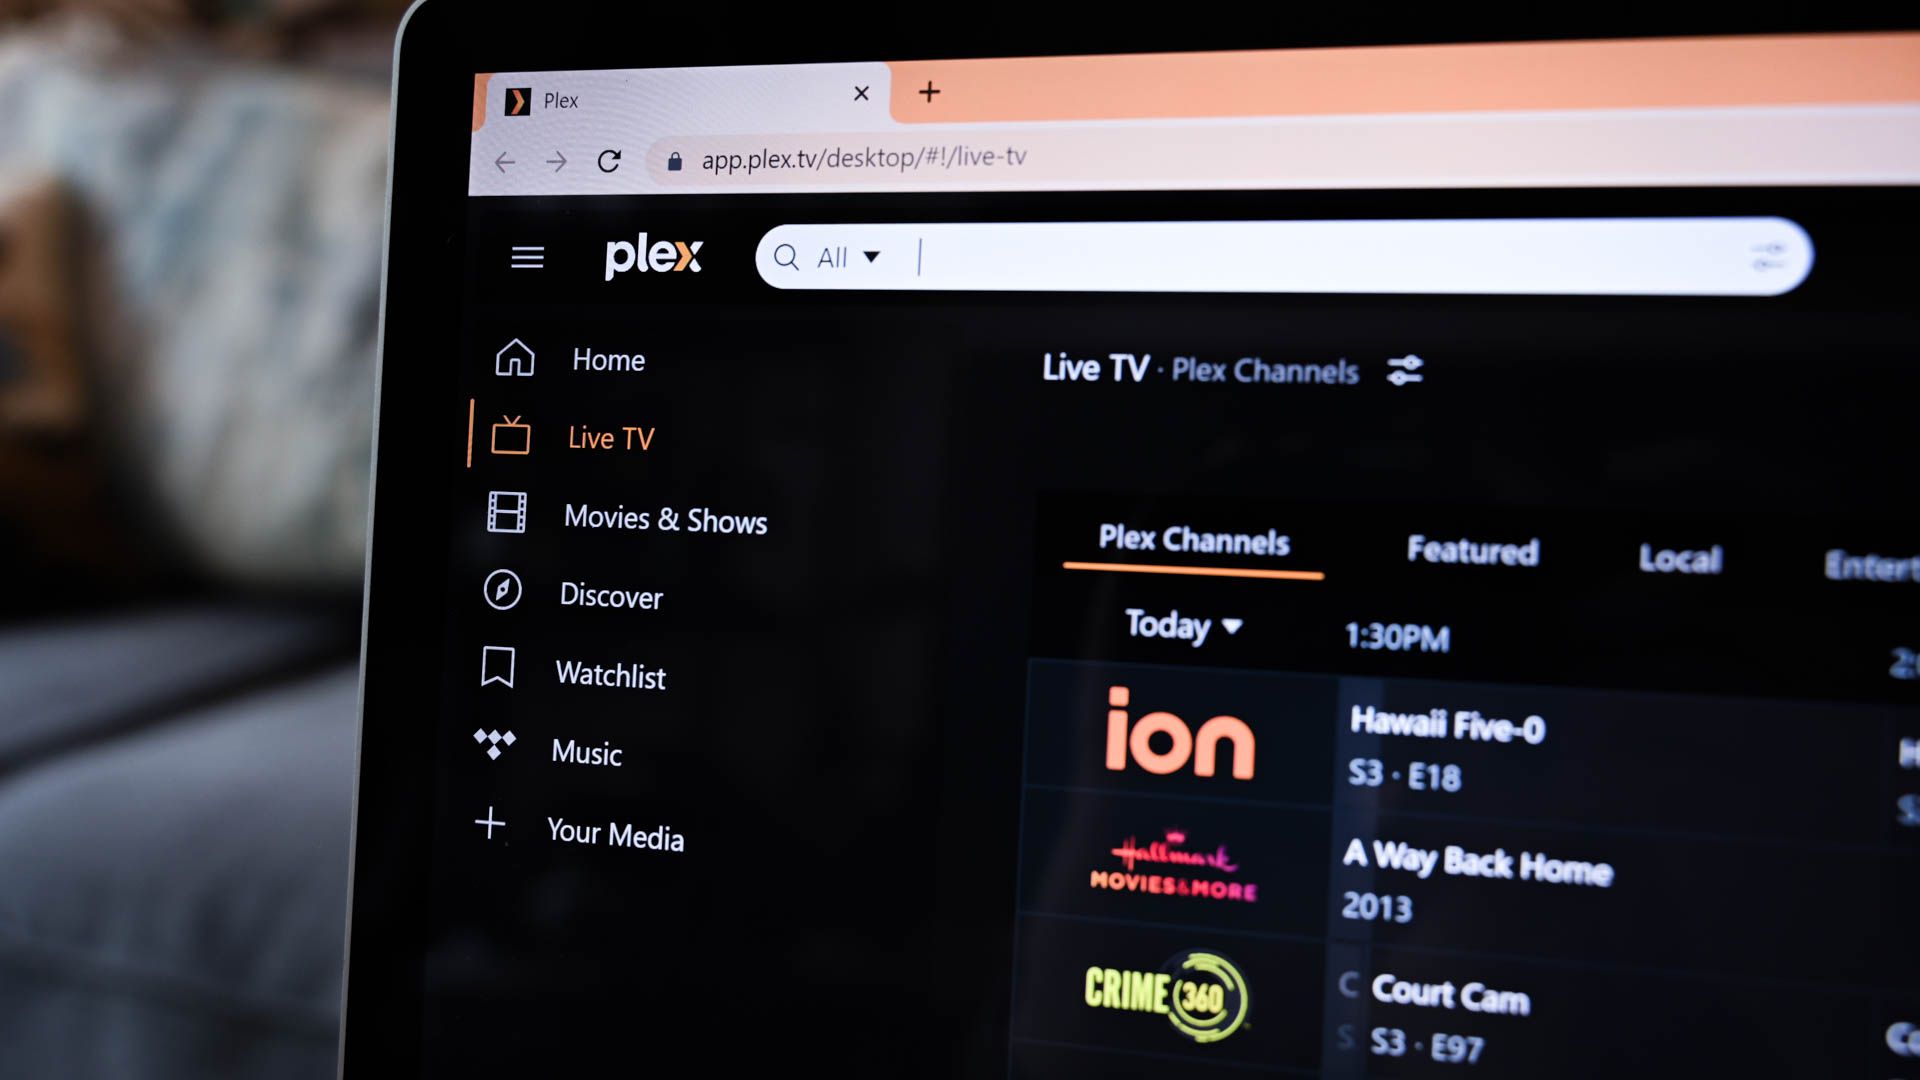 Plex web app opened on a laptop with the search bar visible and live tv tab highlighted.